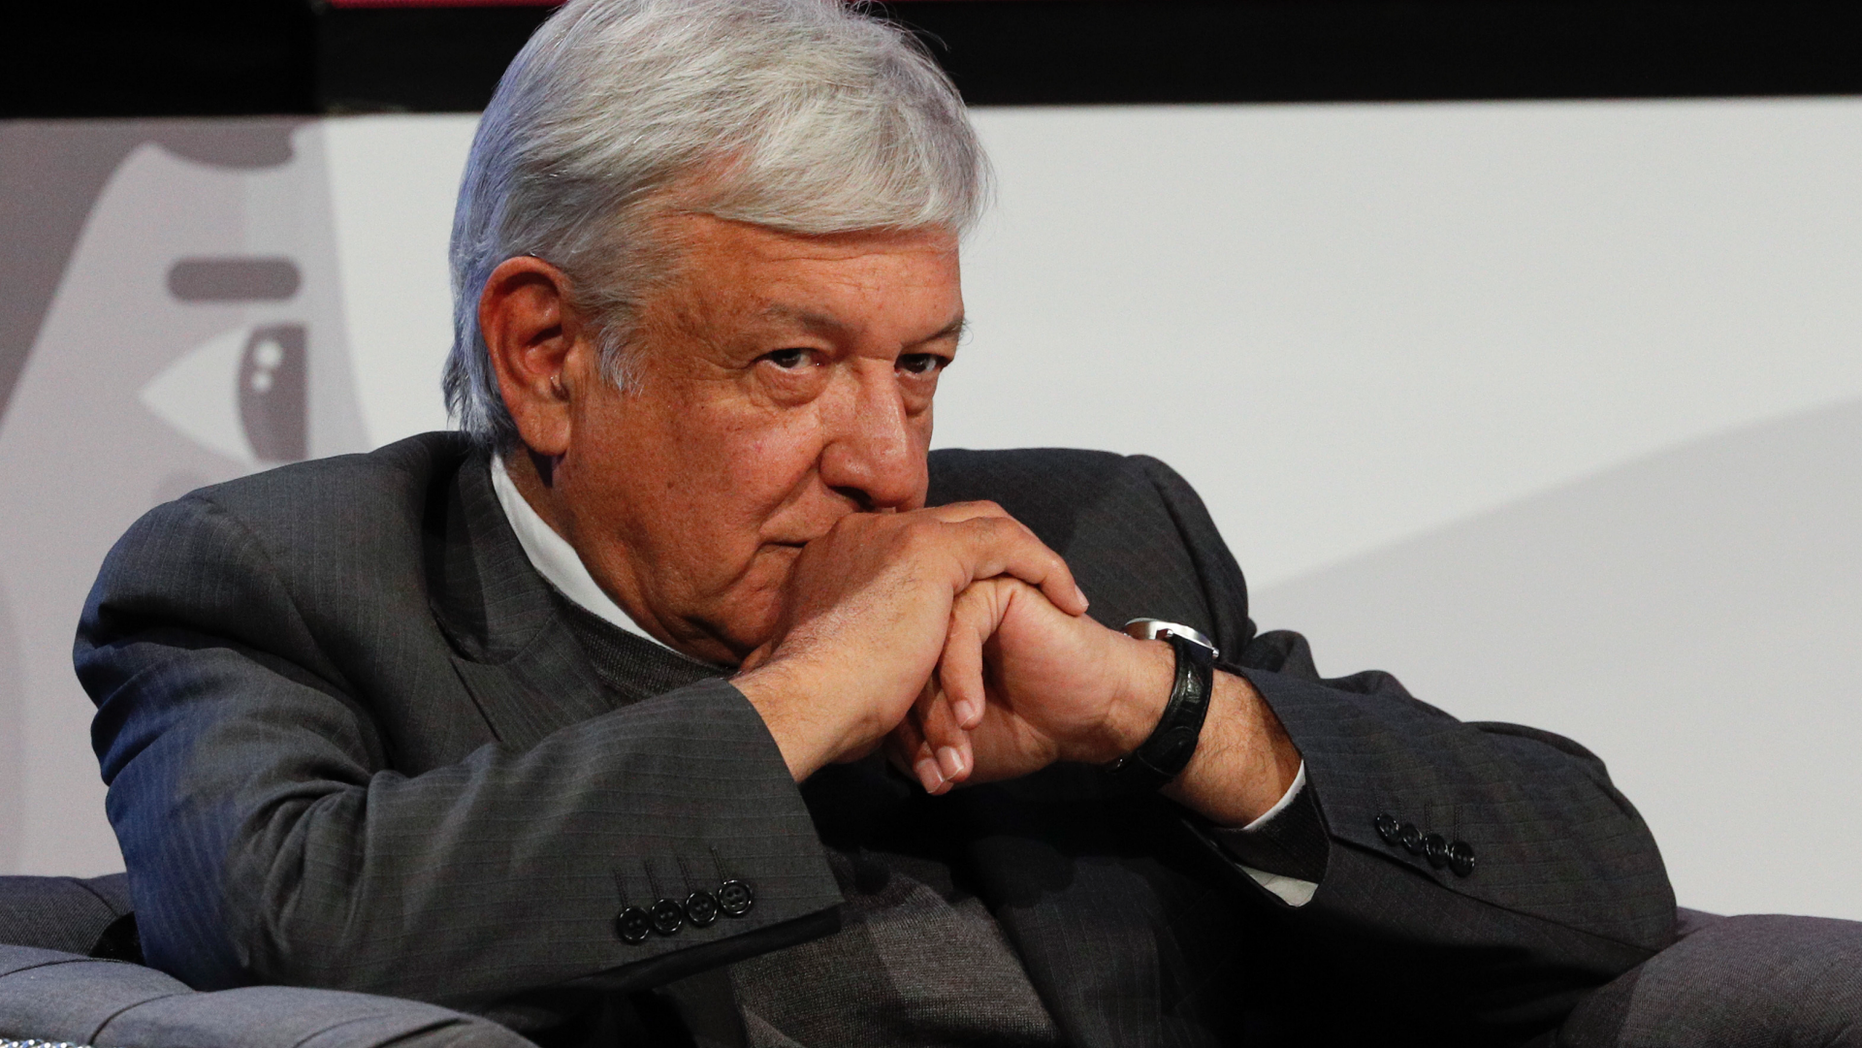 Mexico's President-elect, Andres Manuel Lopez Obrador, listens at a meeting with Ricardo Salinas and other company executives in Mexico City on Thursday, November 22, 2018. The President Elect and Salinas have signed an agreement providing for internships within the Salinas group for 12,000 young people. people and create programs to help tens of thousands of additional young people. (AP Photo / Rebecca Blackwell)